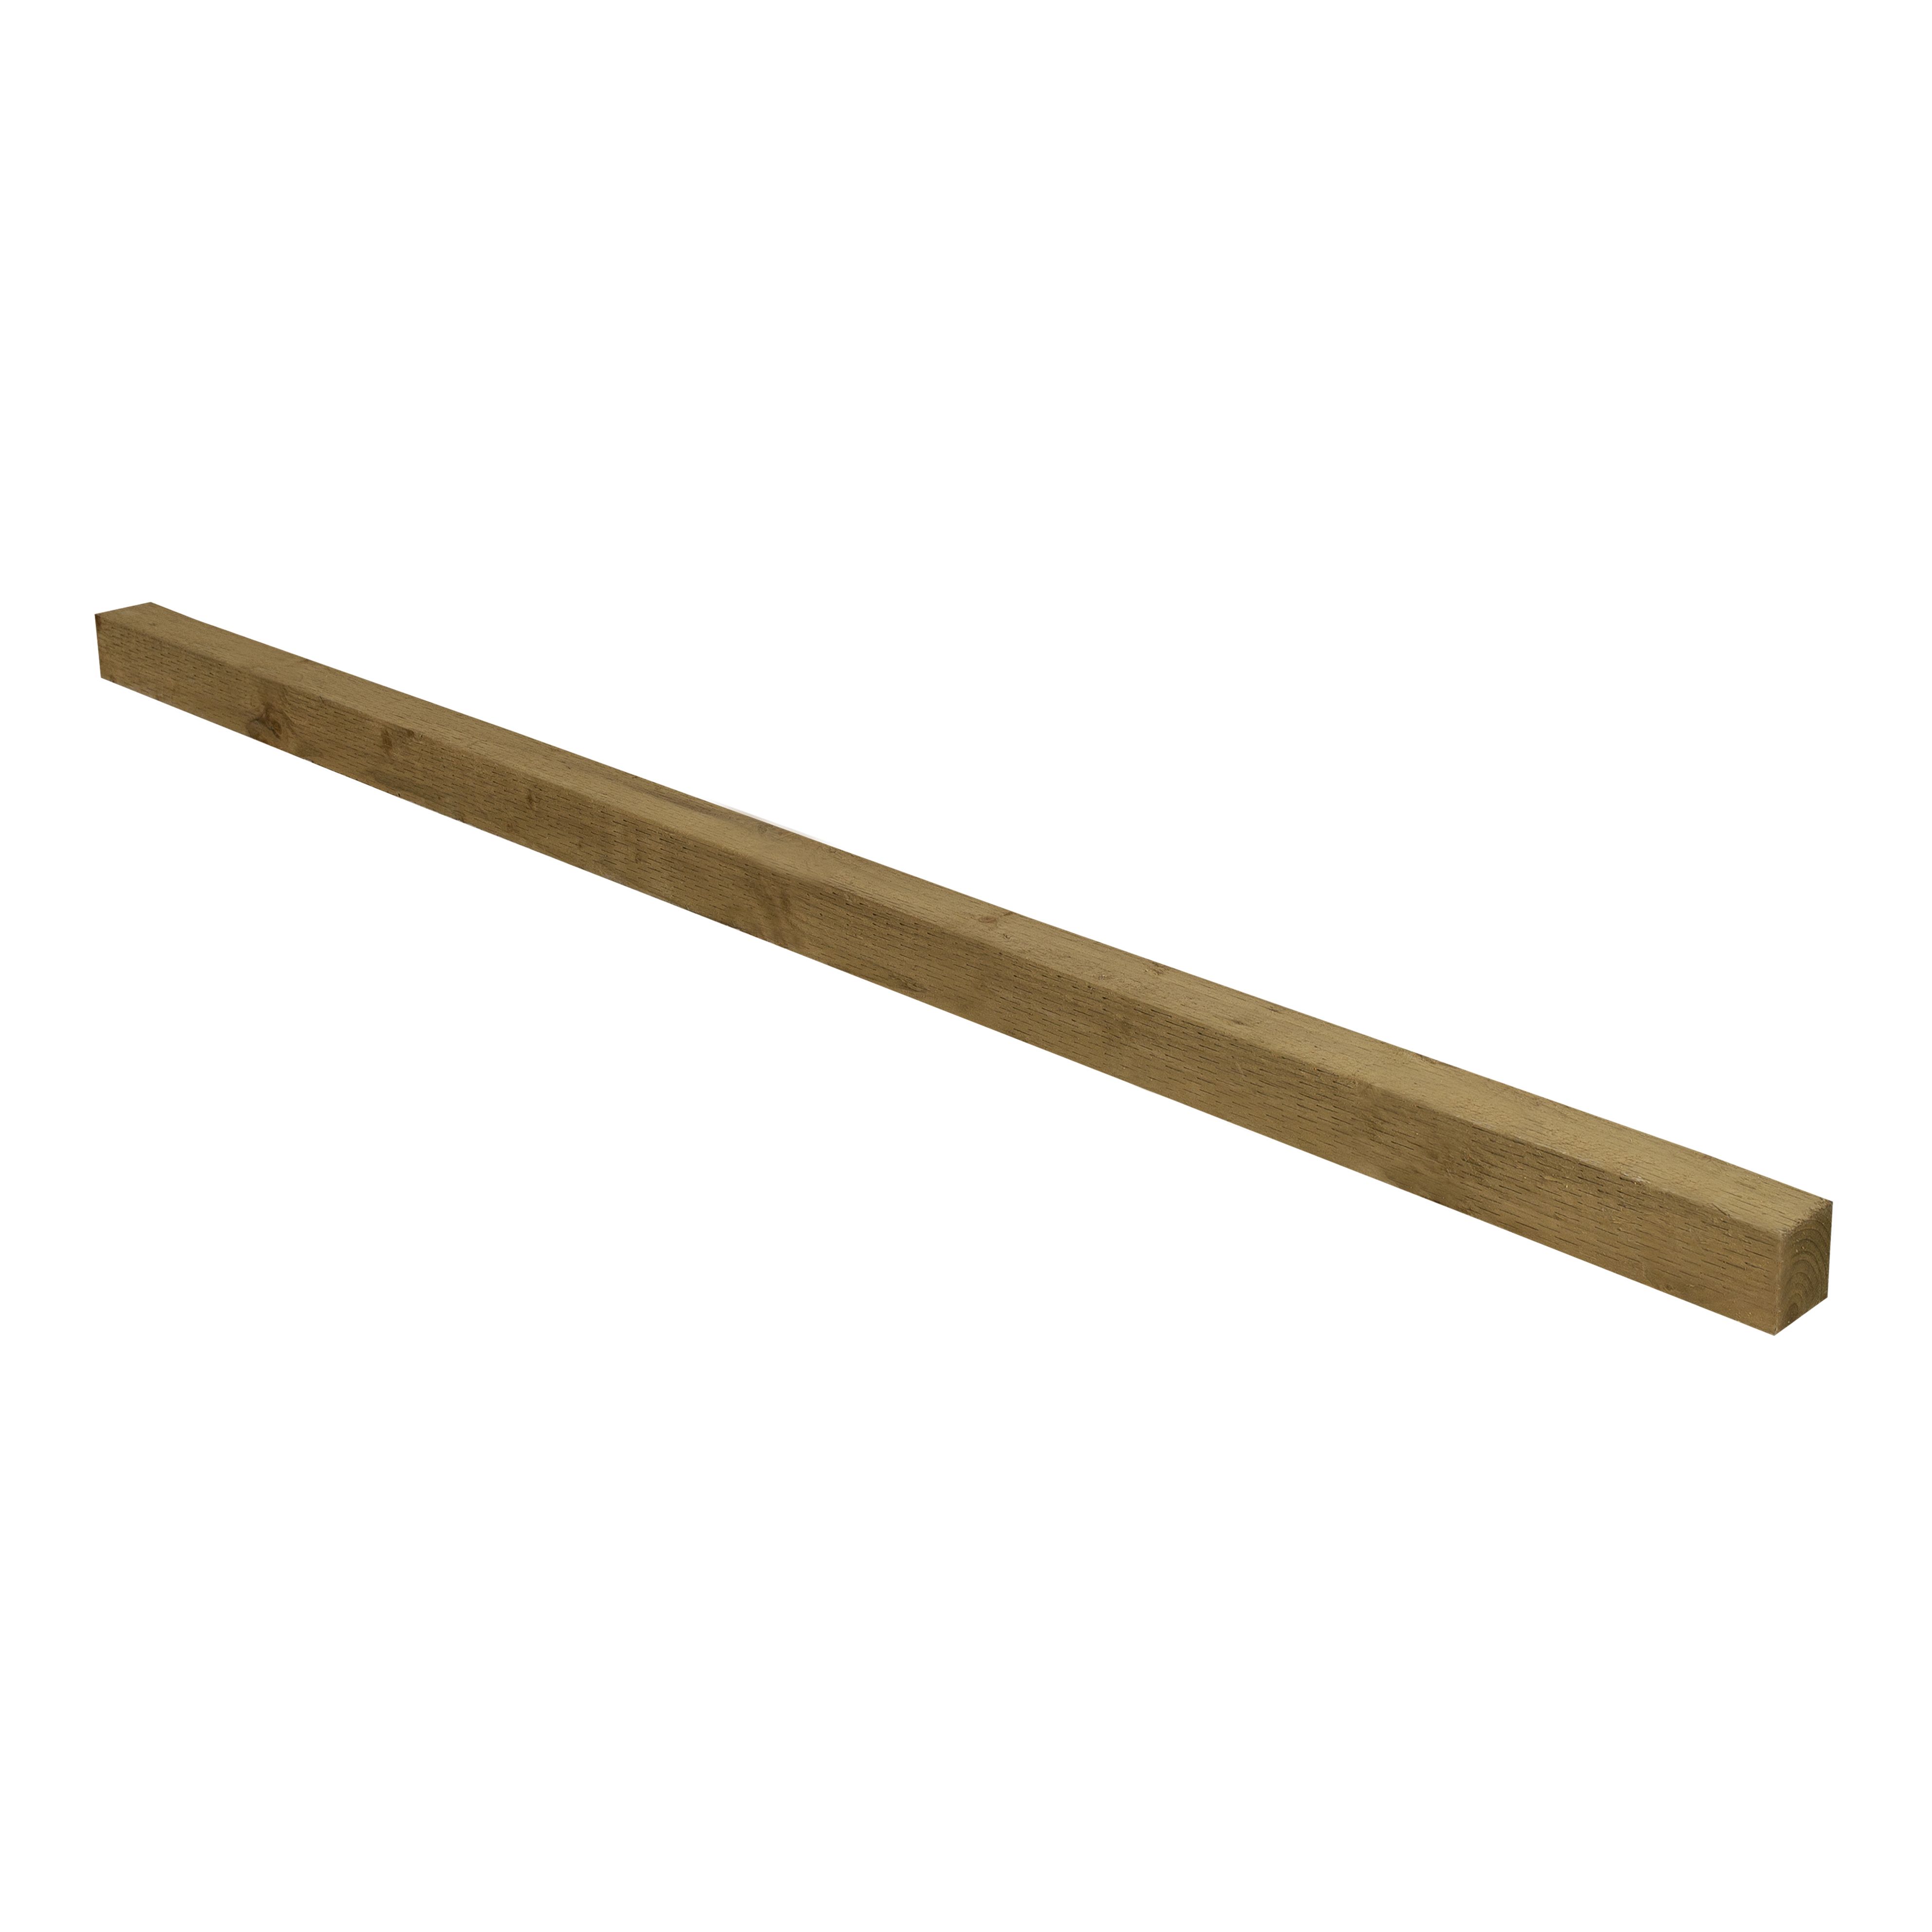 UC4 Green Square Wooden Fence post (H)2.1m (W)75mm, Pack of 3